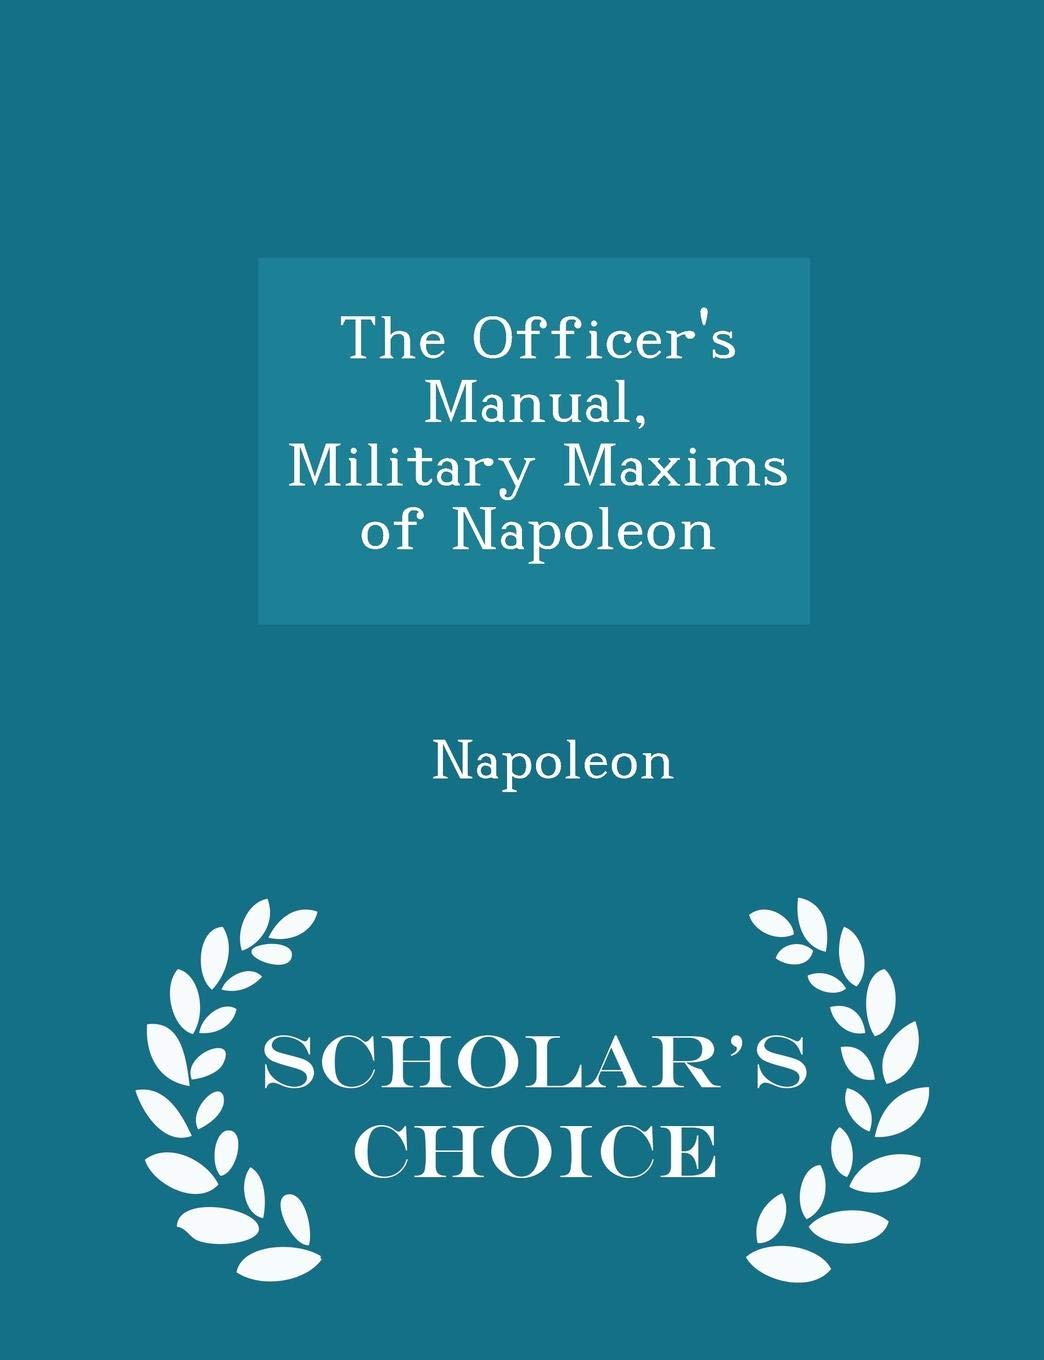 The Officer's Manual: Military Maxims of Napoleon